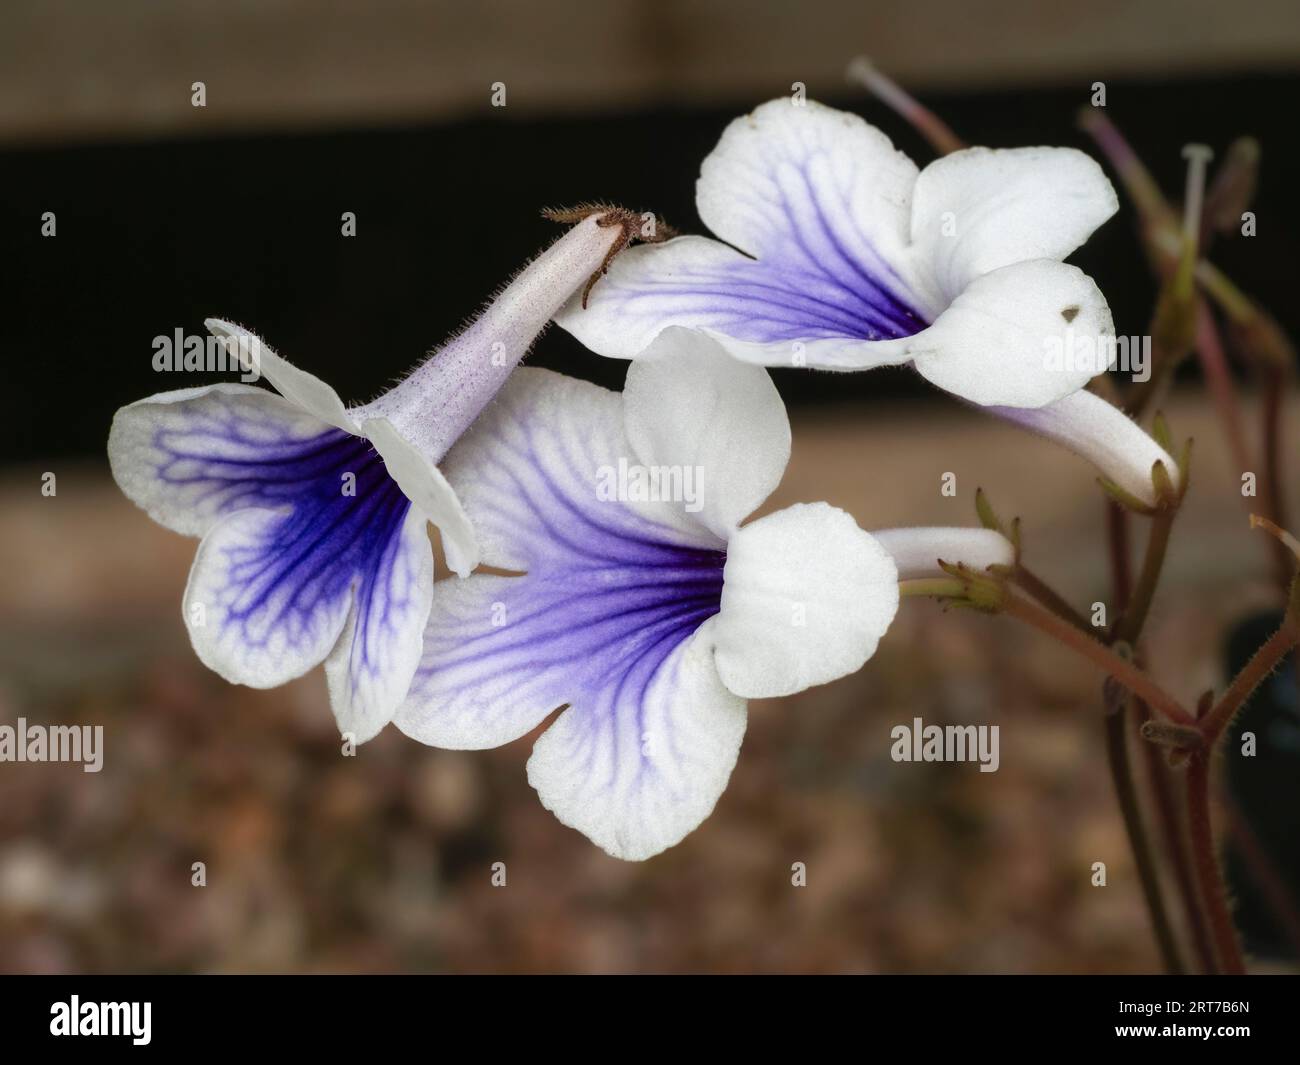 Blue throated white flowers of the tender South African Streptocarpus rexii, the type species for the genus Stock Photo